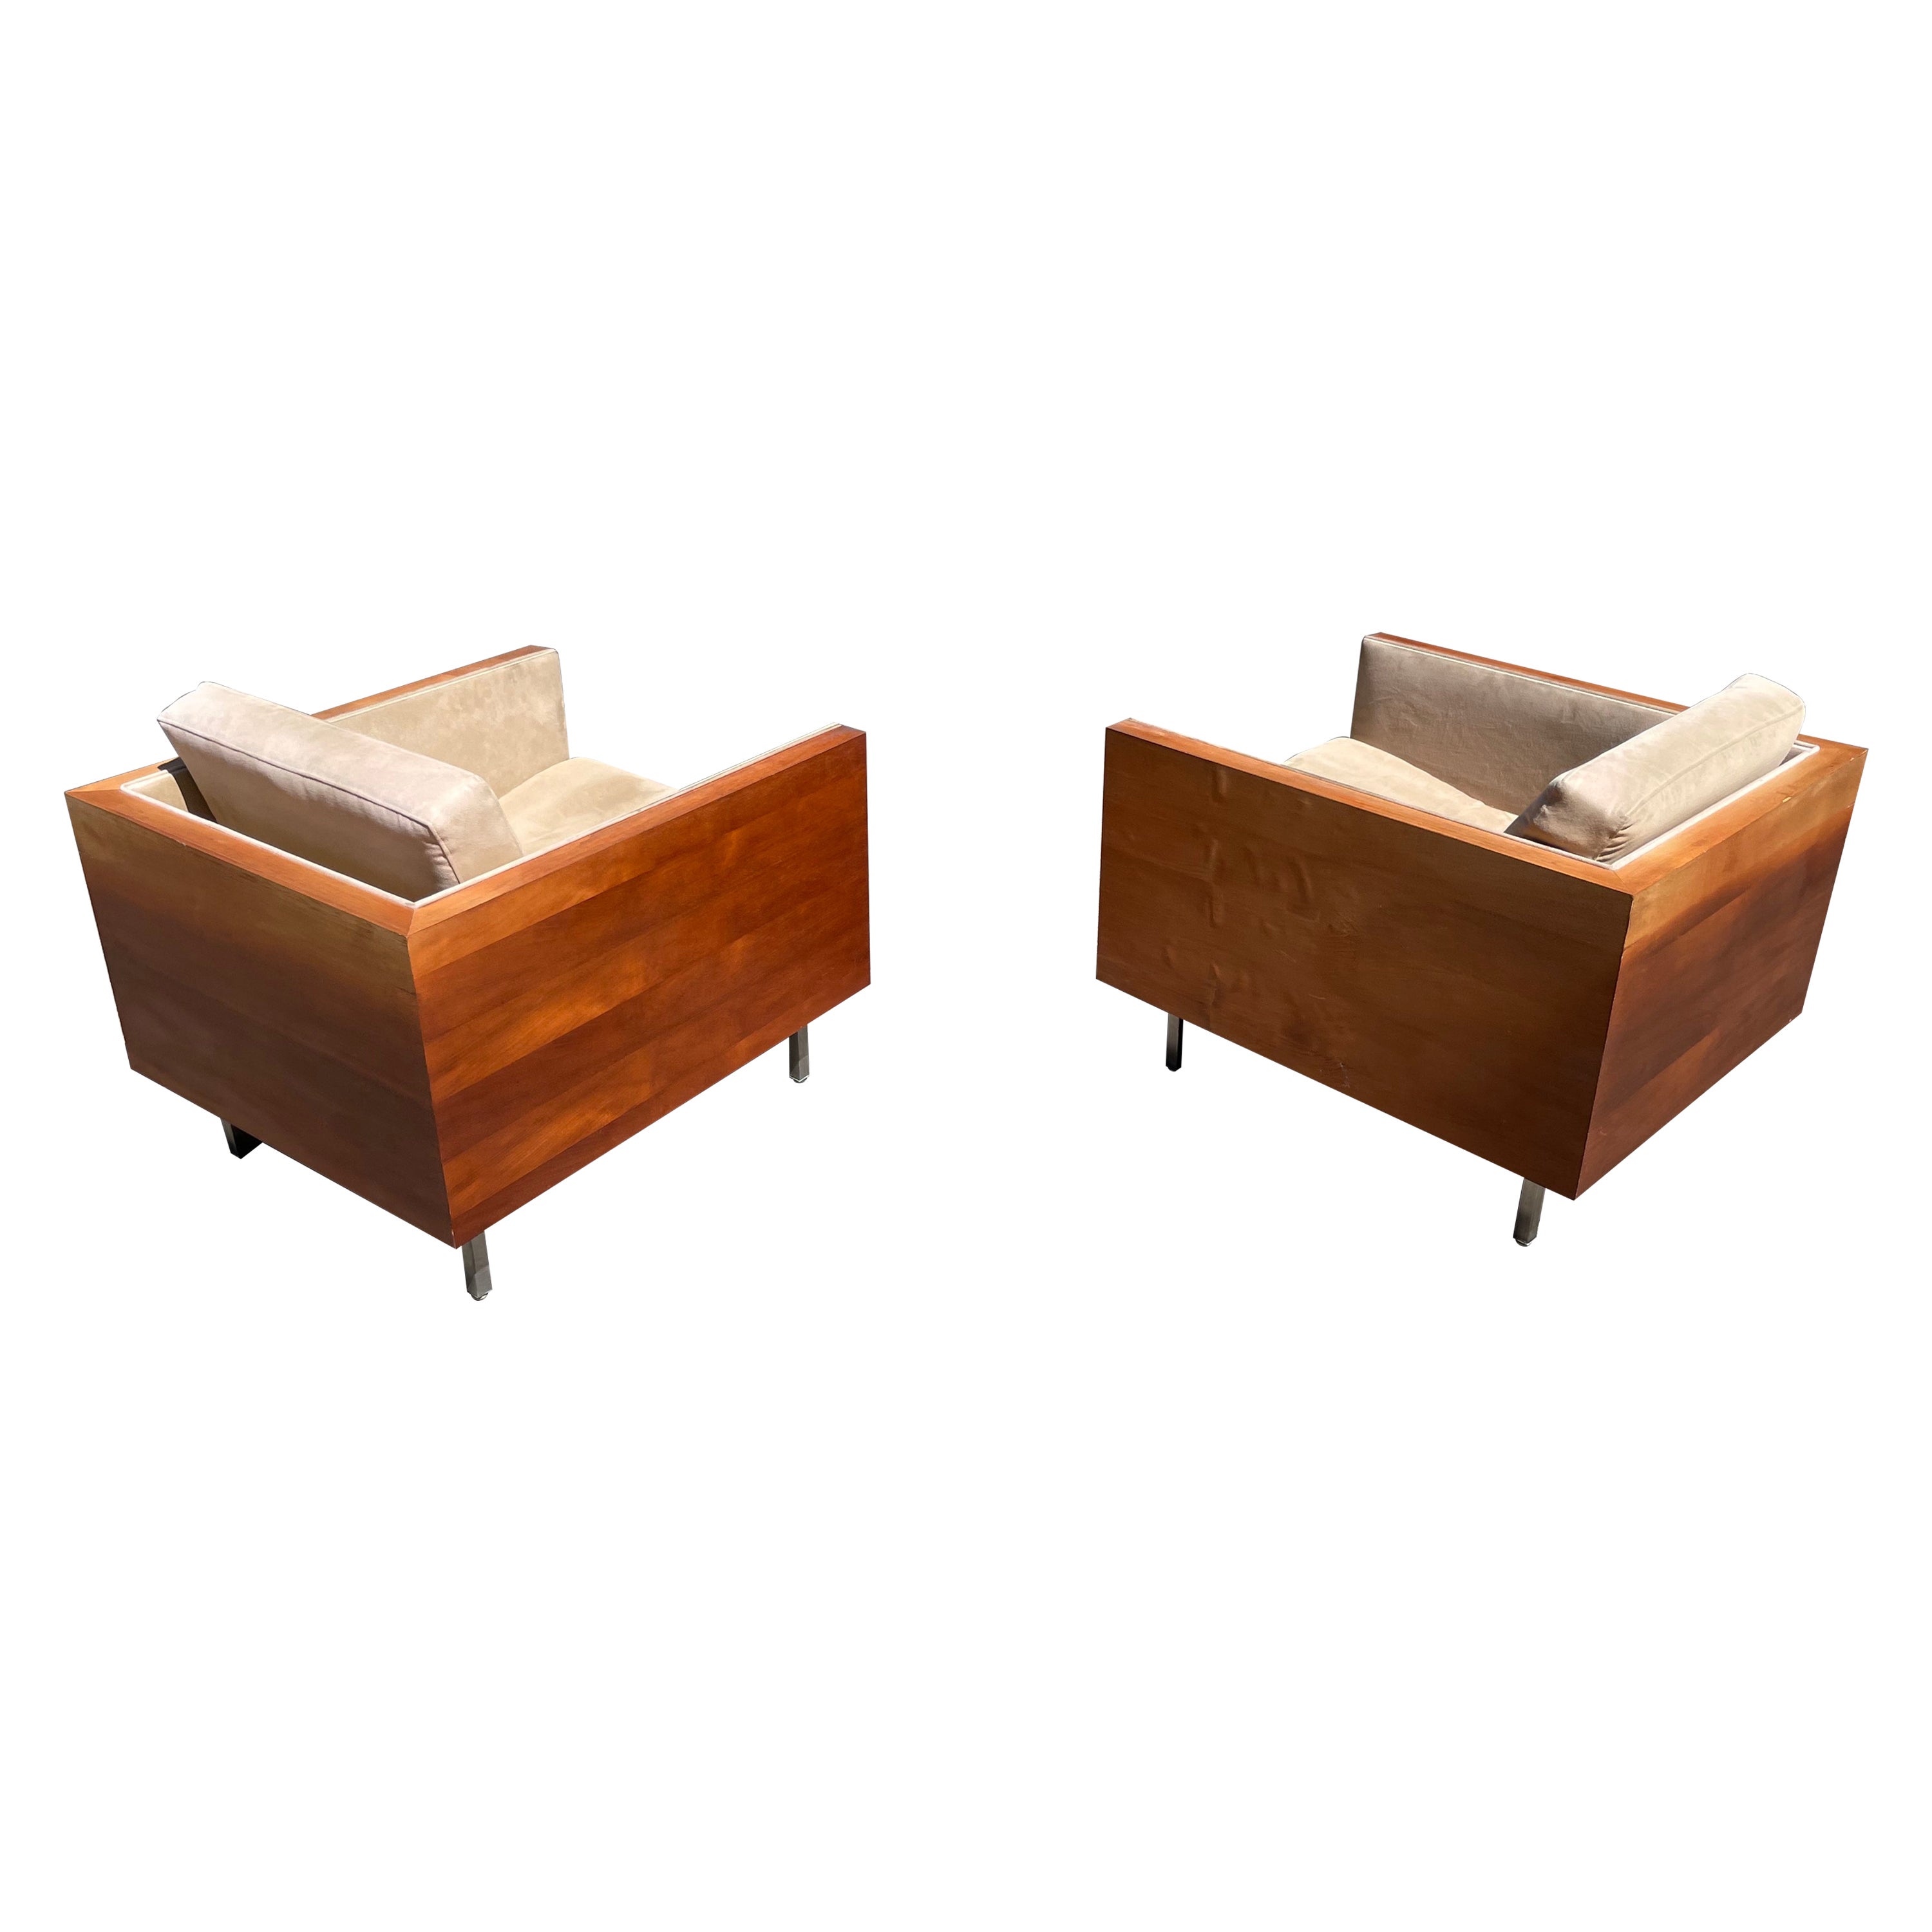 Walnut Case Cube Baughman Style Lounge Chairs - Pair